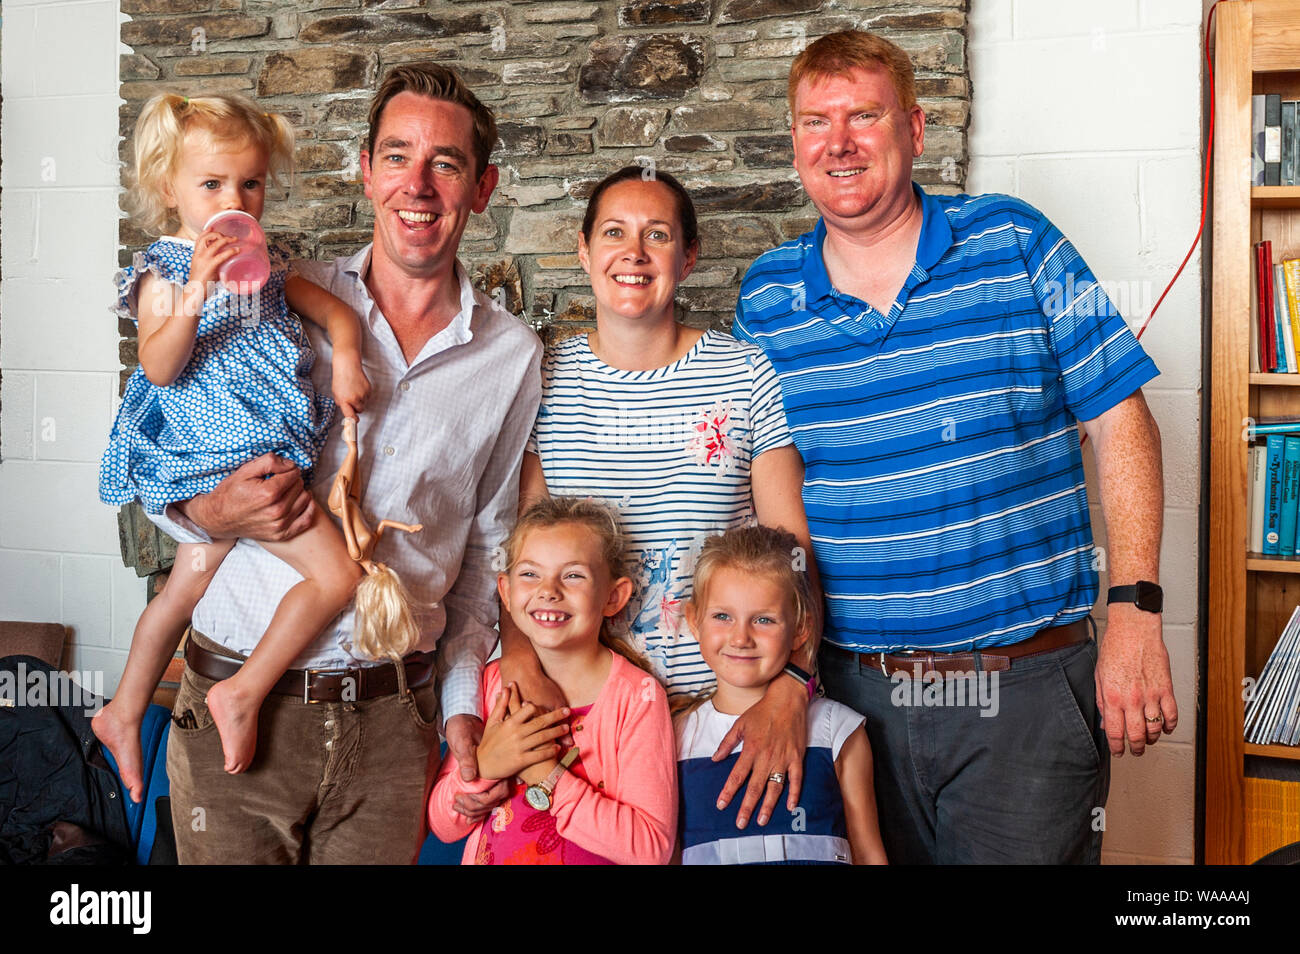 Schull, West Cork, Ireland. 19th Aug, 2019. After many years of invitations, TV and radio star Ryan Tubridy finally came to Schull to present his show on RTE Radio 1 today.  He interviewed local people and posed for pictures afterwards, before going on a walkabout in Schull Village. With Ryan Tubridy were Cape Clear Ferry owners Brendan, Karen, Caoimhe, Ciara and Róisín Cottrell. Credit: AG News/Alamy Live News. Stock Photo